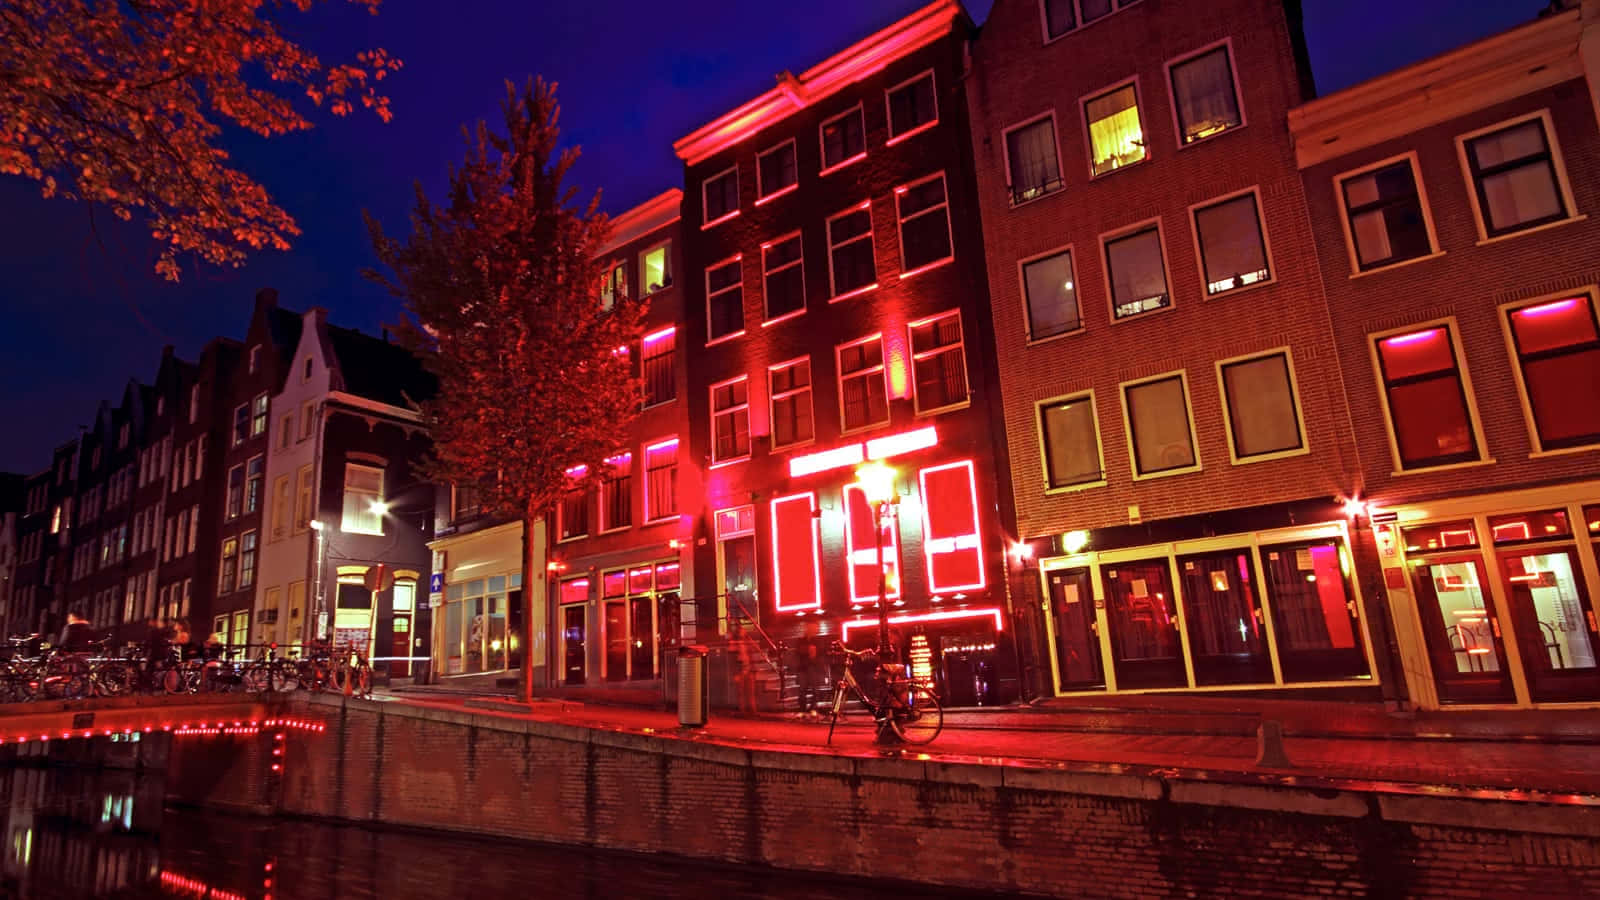 Illuminated nightlife at the Red Light District Wallpaper